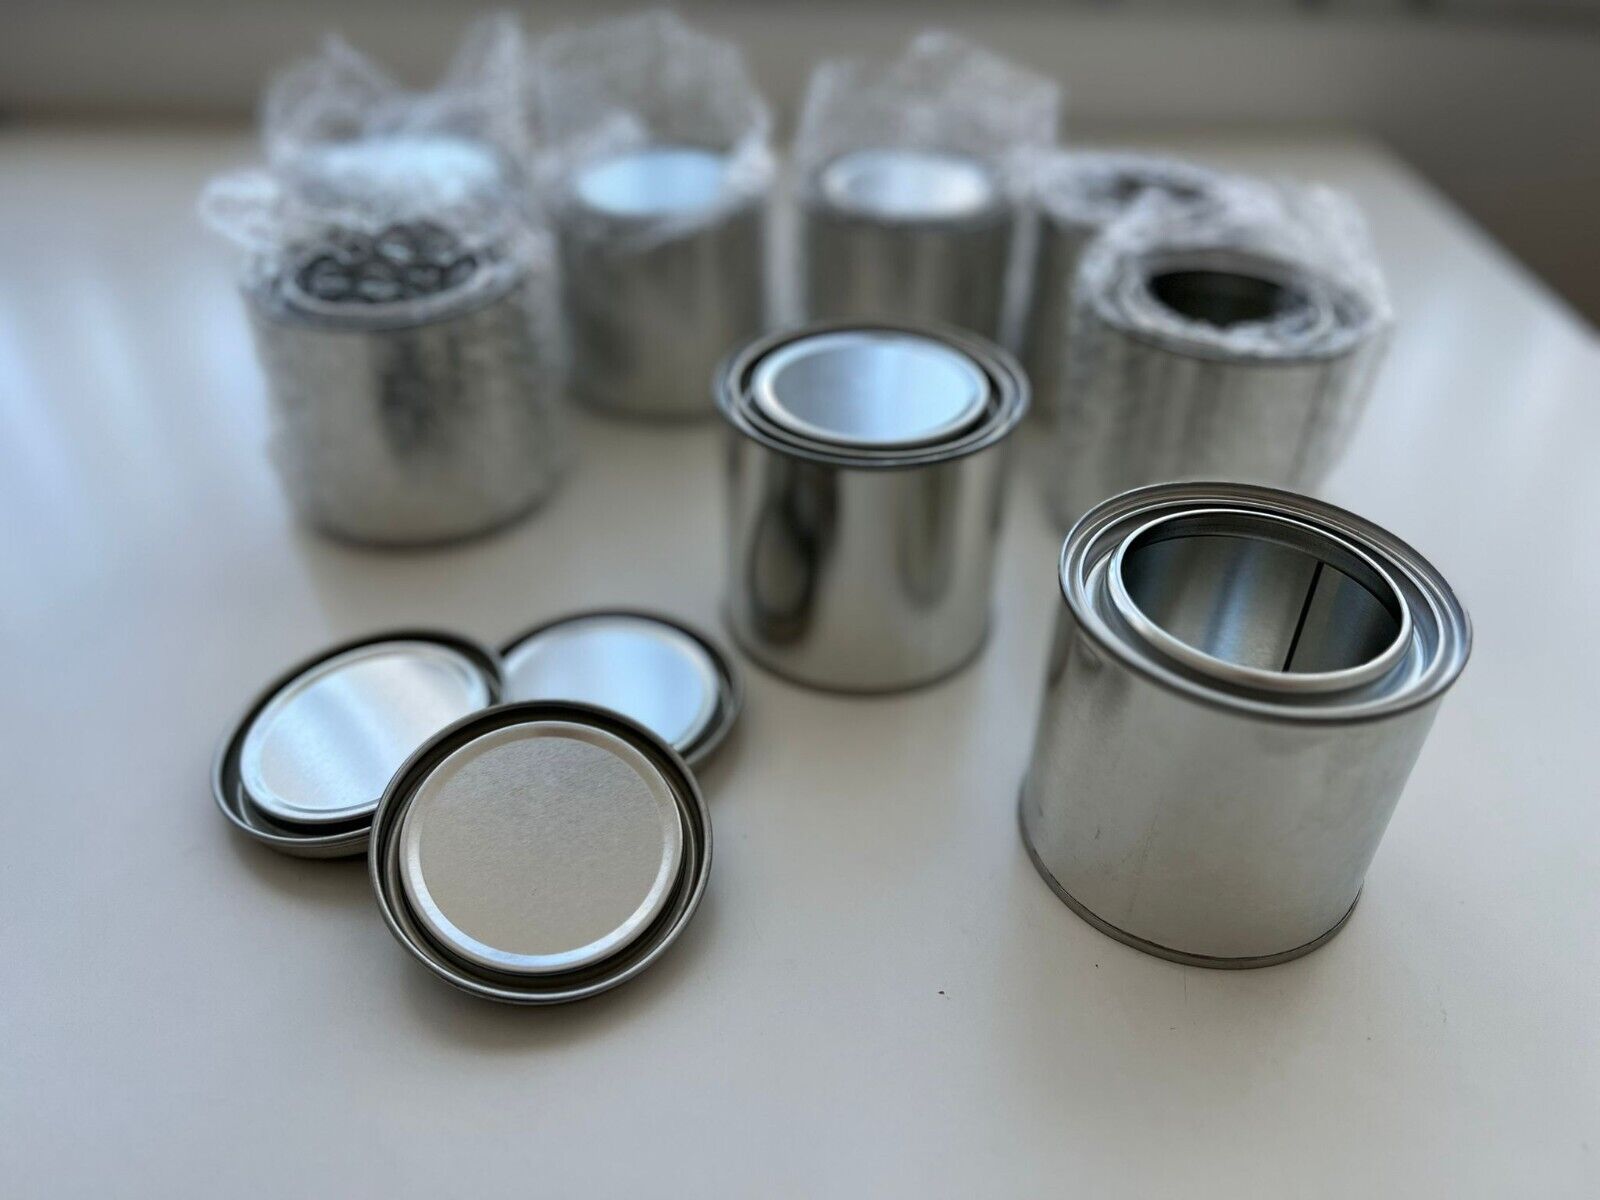 Ulined Metal Tin Cans with Lids (8 oz Size 6 Pack) - Metal Paint & Candle Vessel